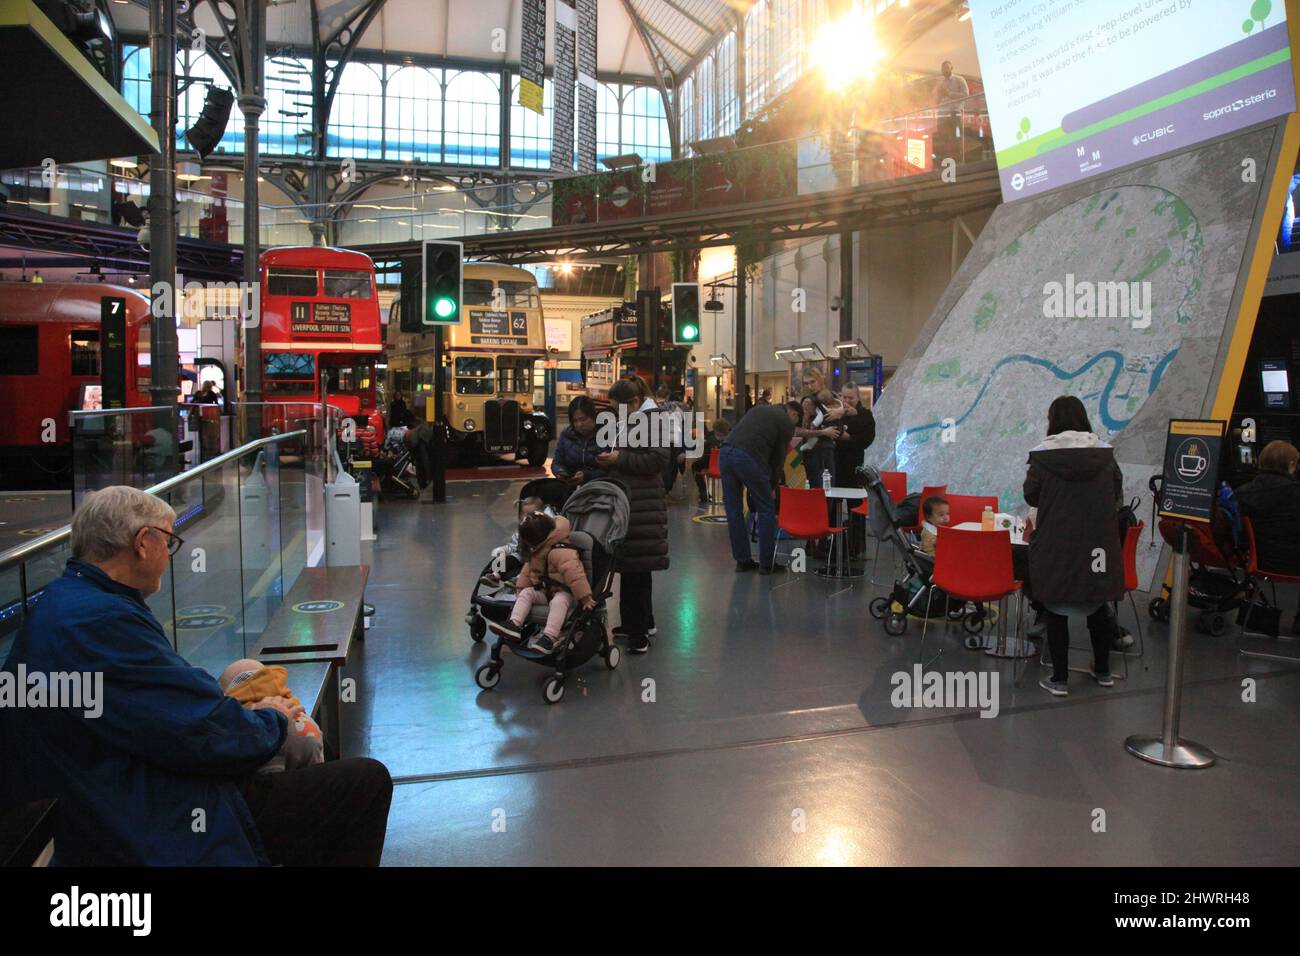 Global view on London's exhibition of ancient transports, ground floor London's Transport Museum Stock Photo